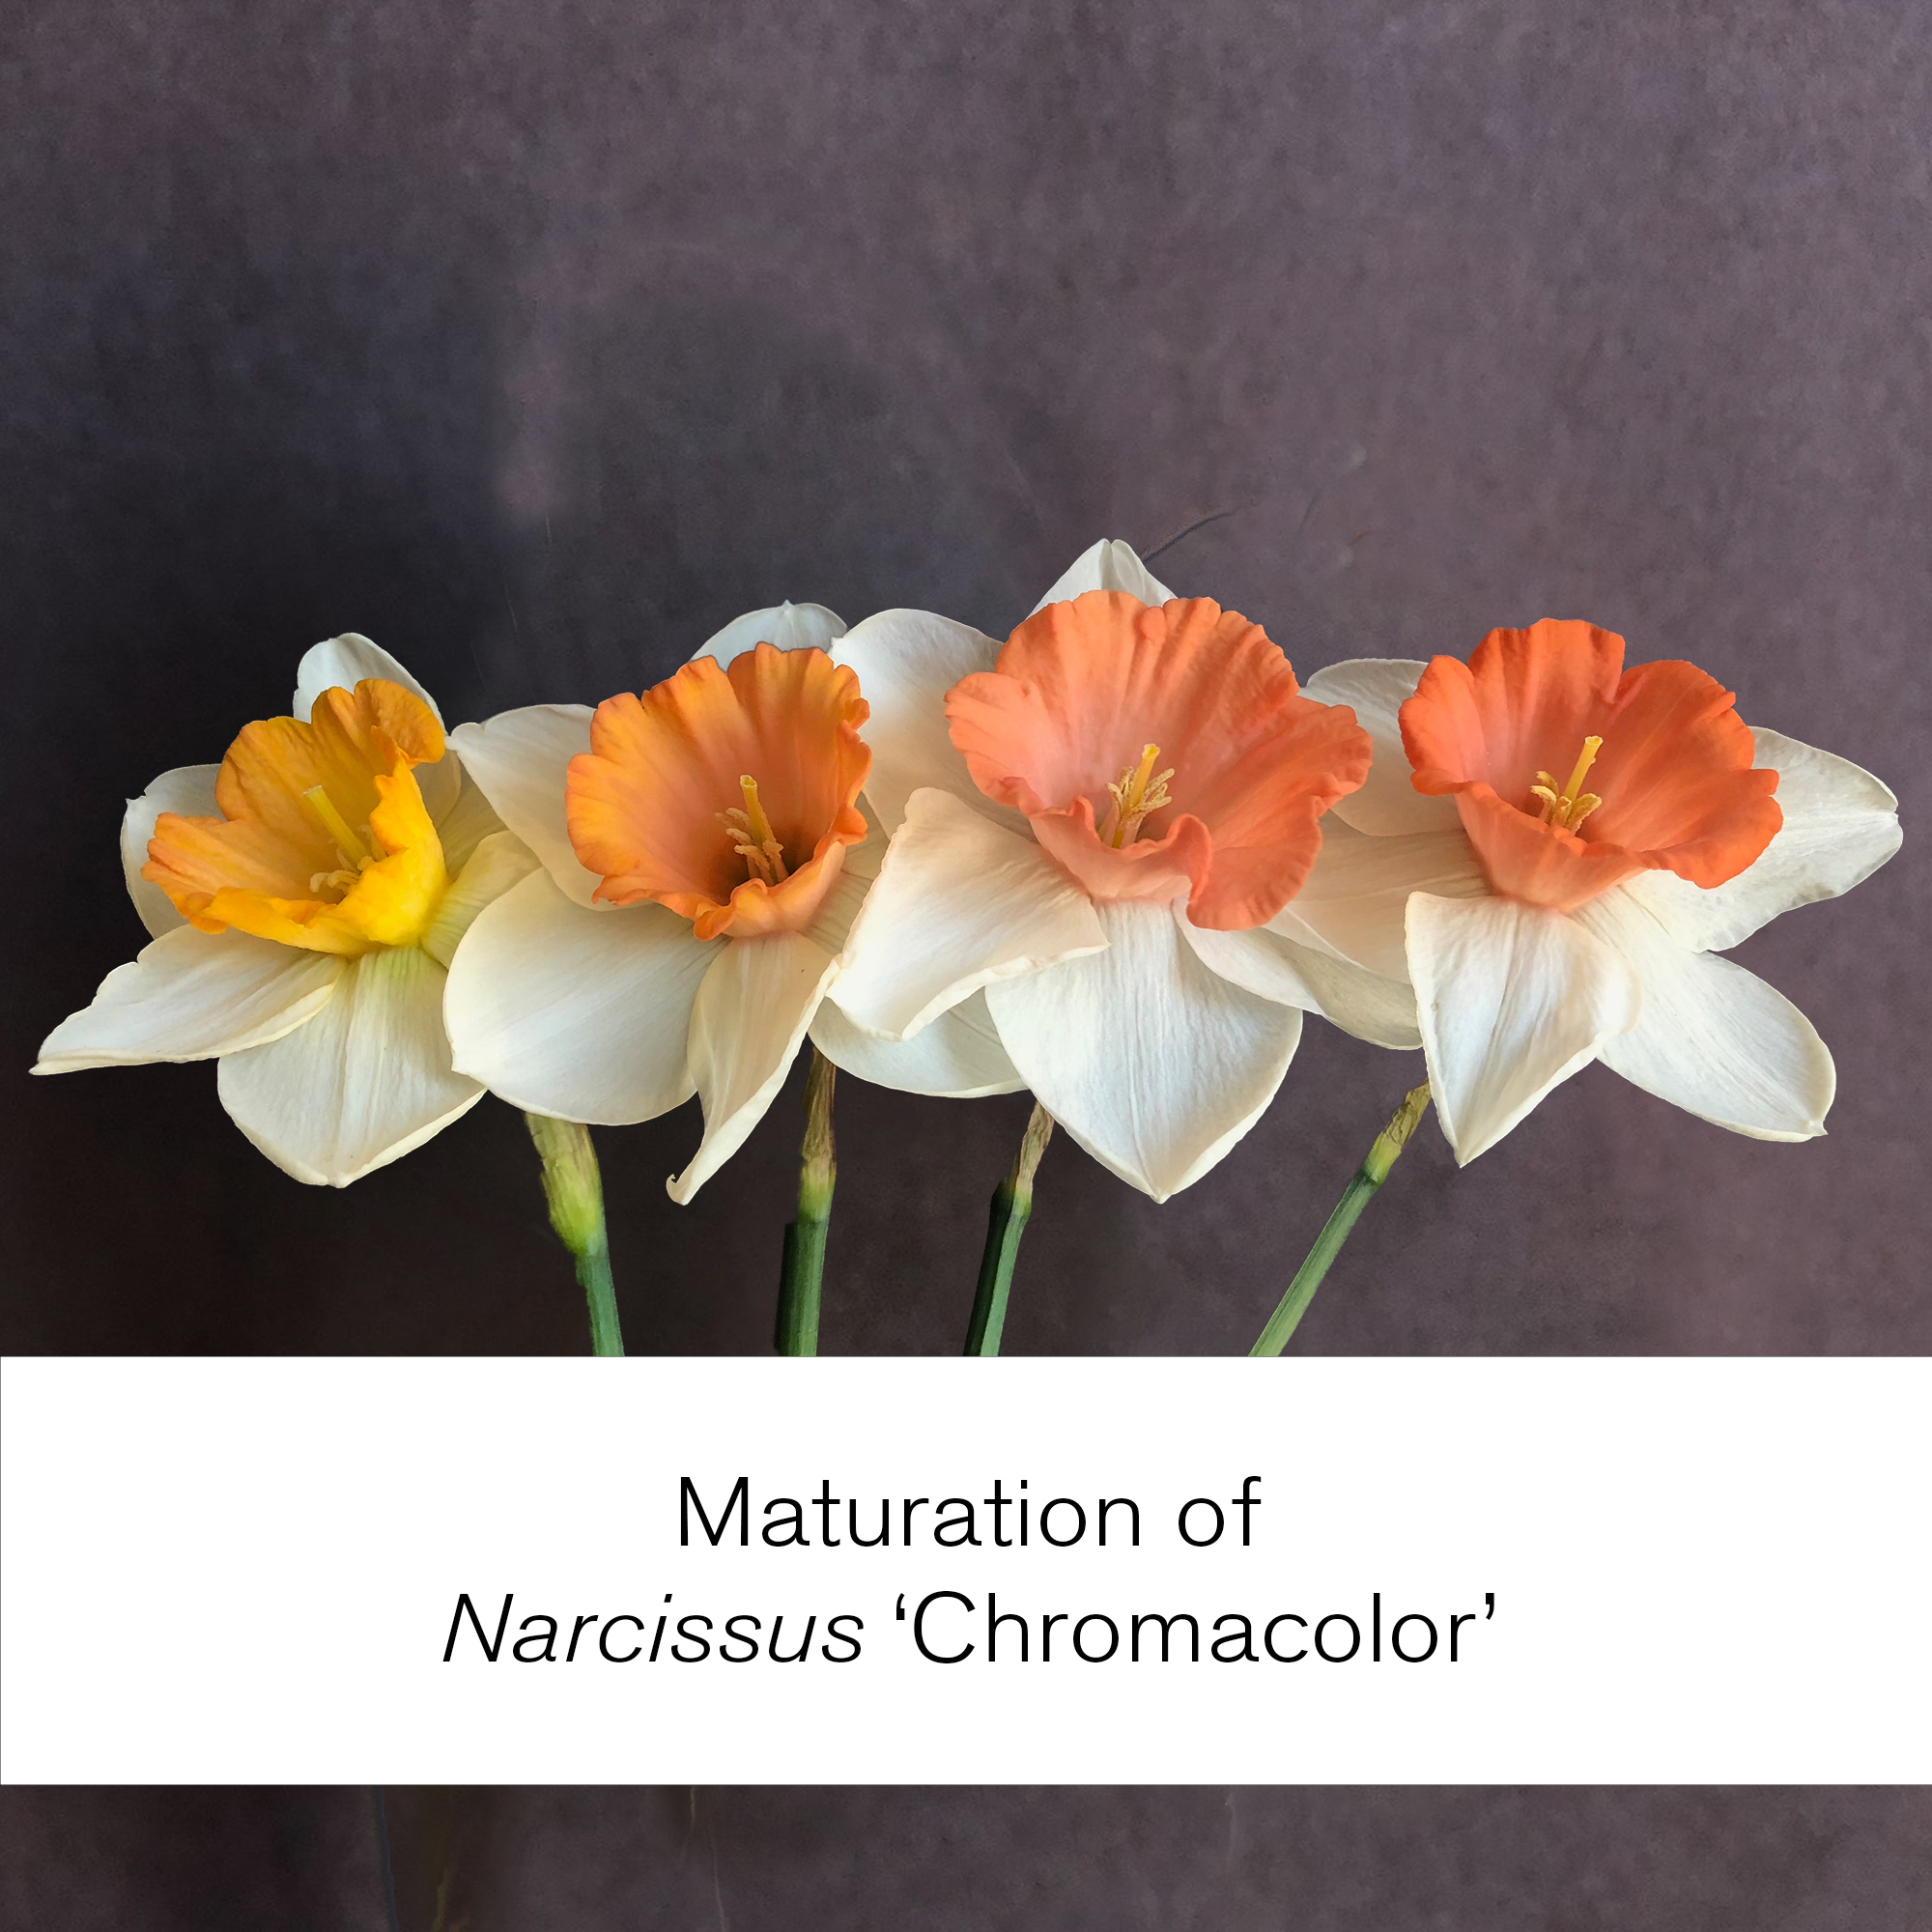 four narcissus chromacolor flowers each with a different colored corona from left to right yellow, orange/pink, coral, bright coral. text below the flowers reads maturation of narcissus chromacolor